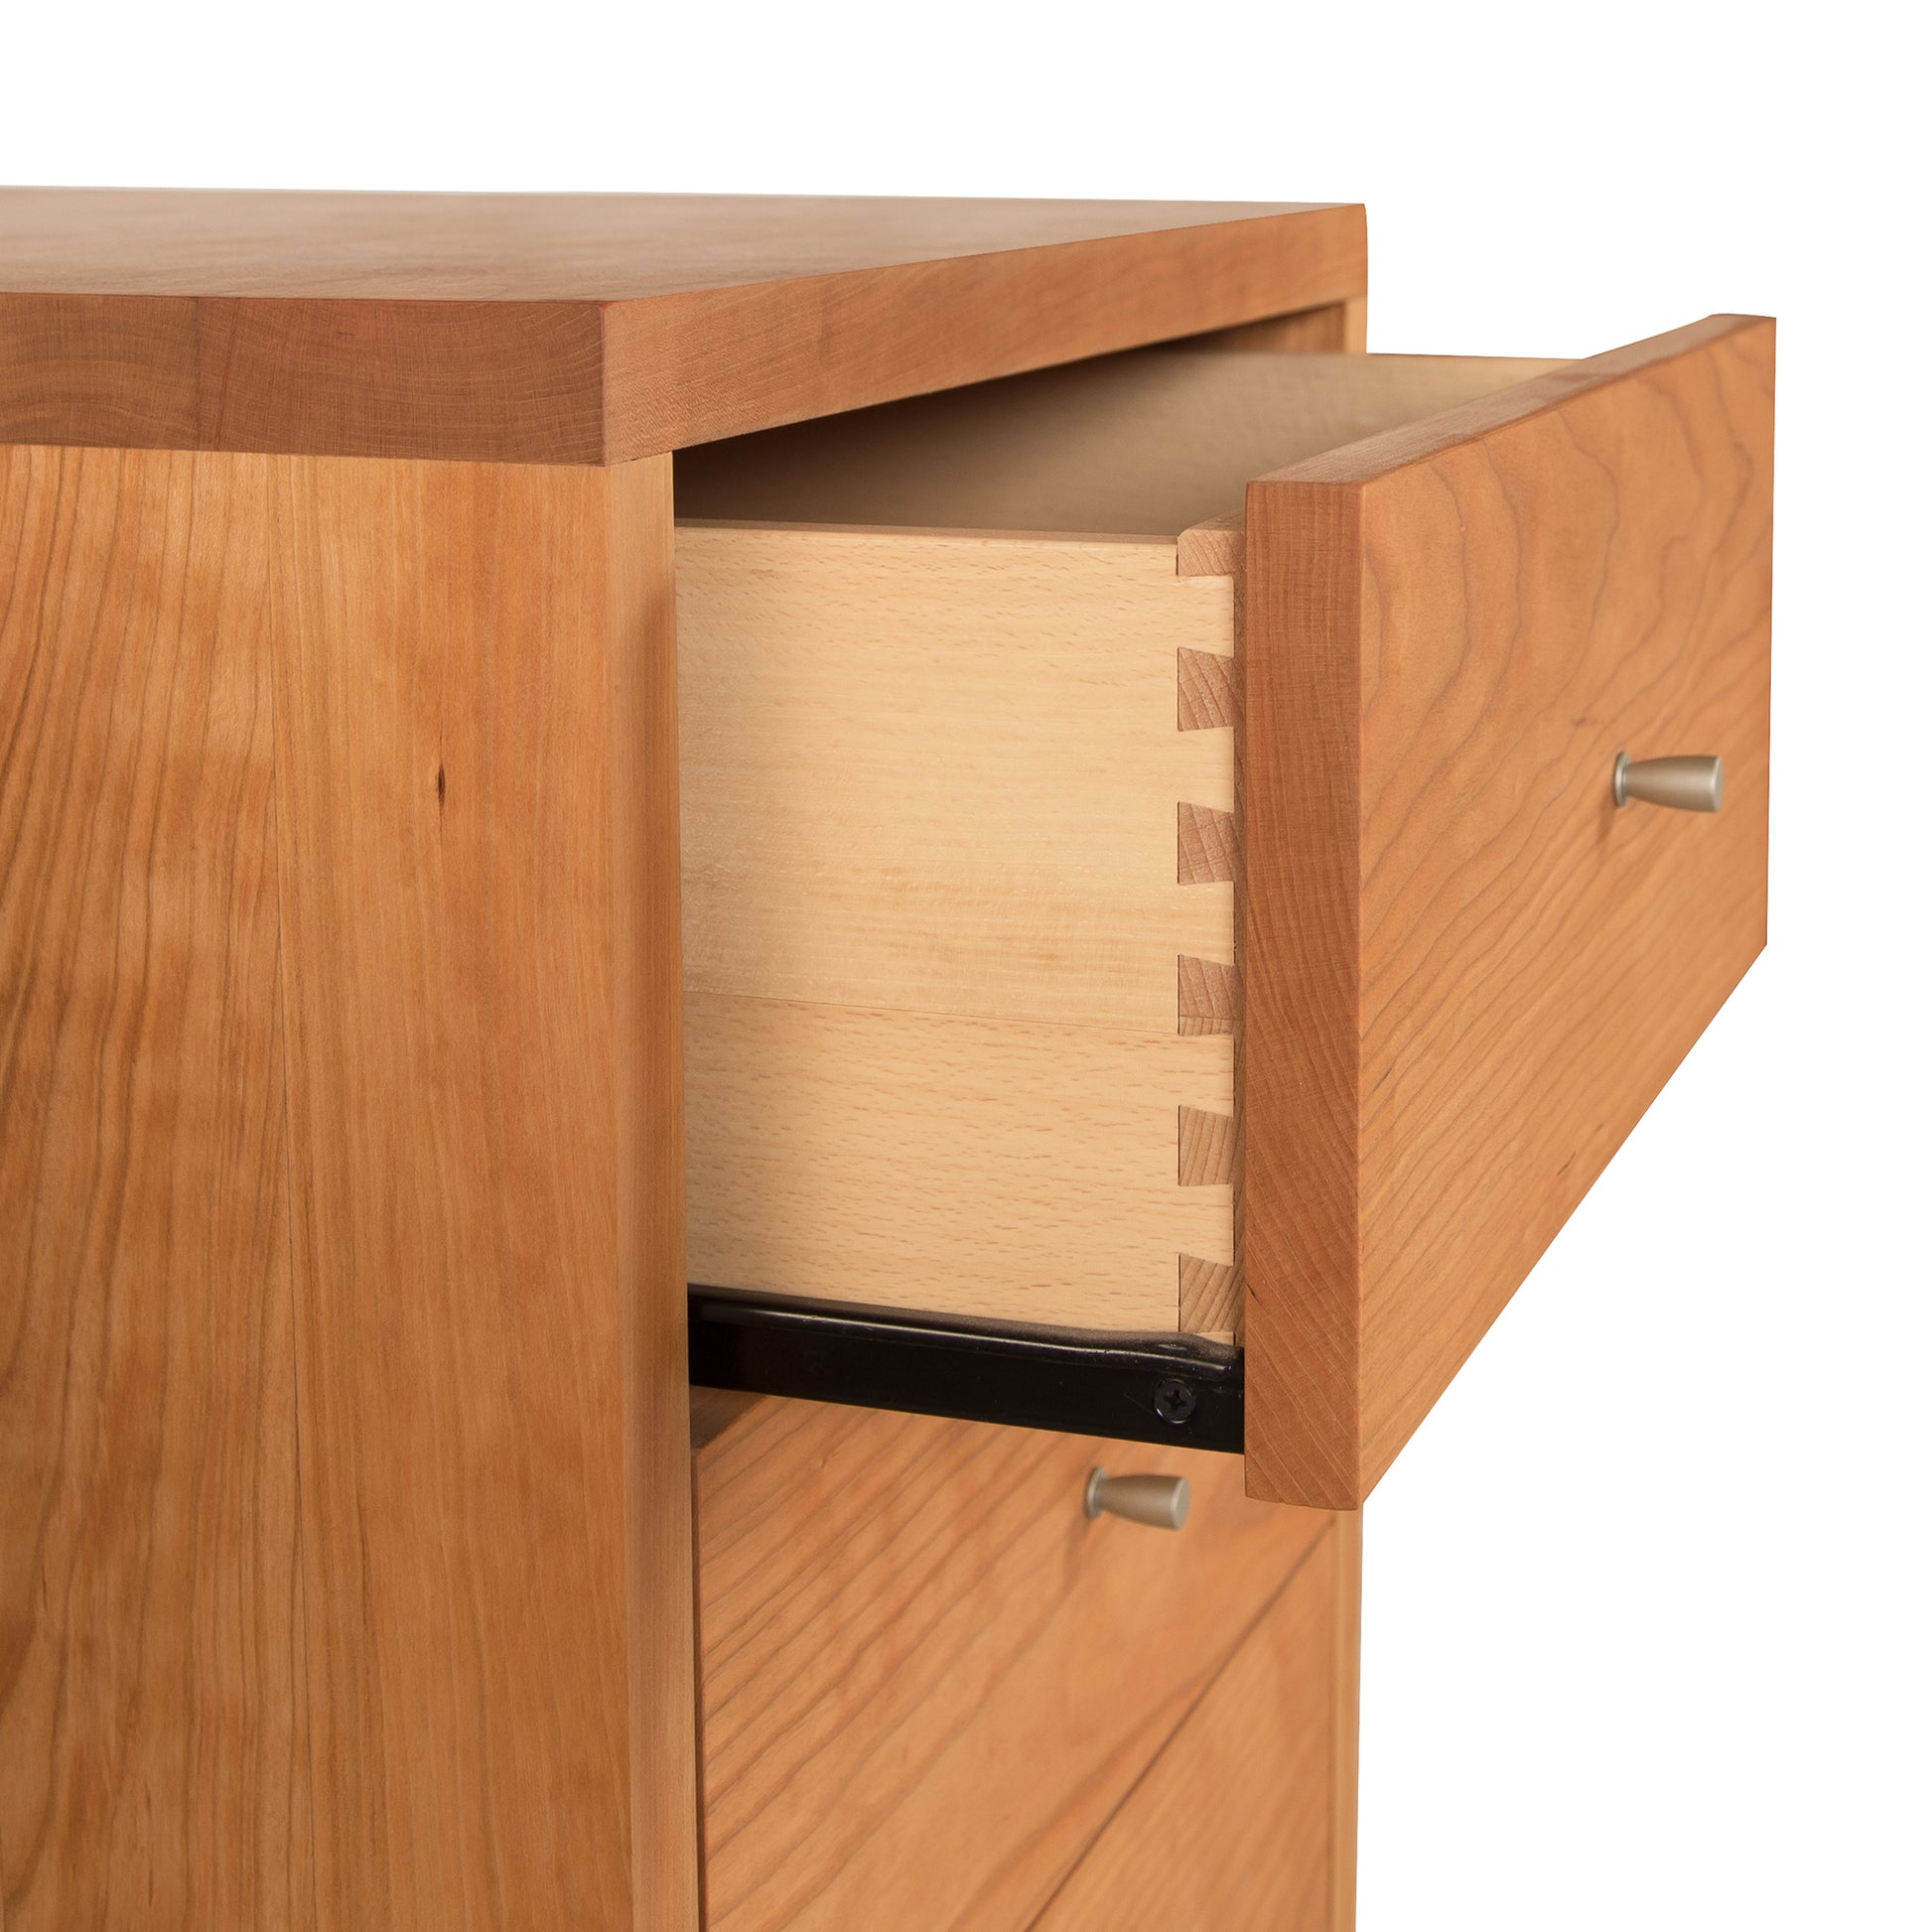 A close up of a drawer in the Vermont Furniture Designs Larssen 3-Drawer Nightstand.